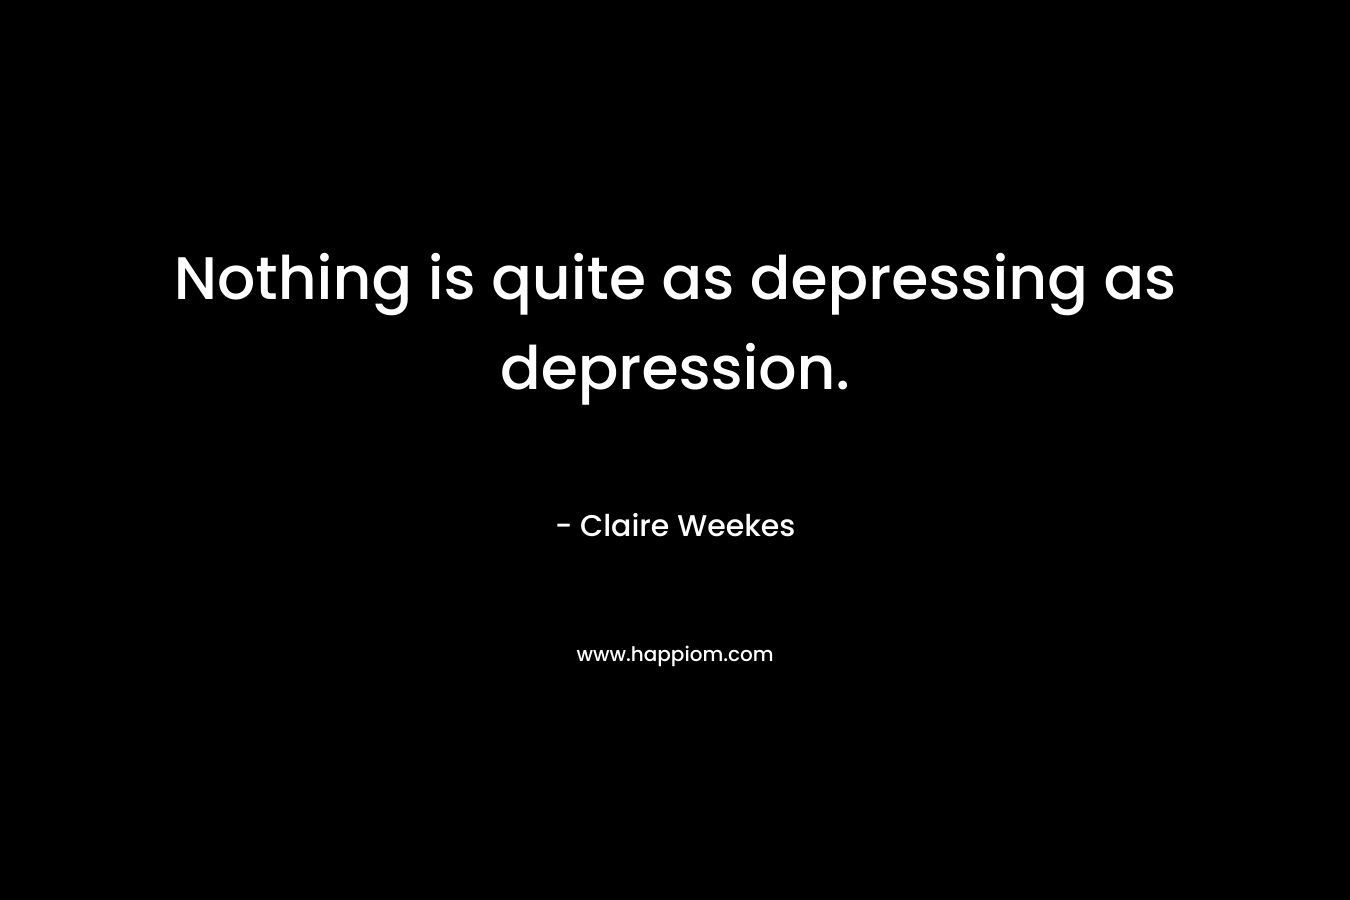 Nothing is quite as depressing as depression.